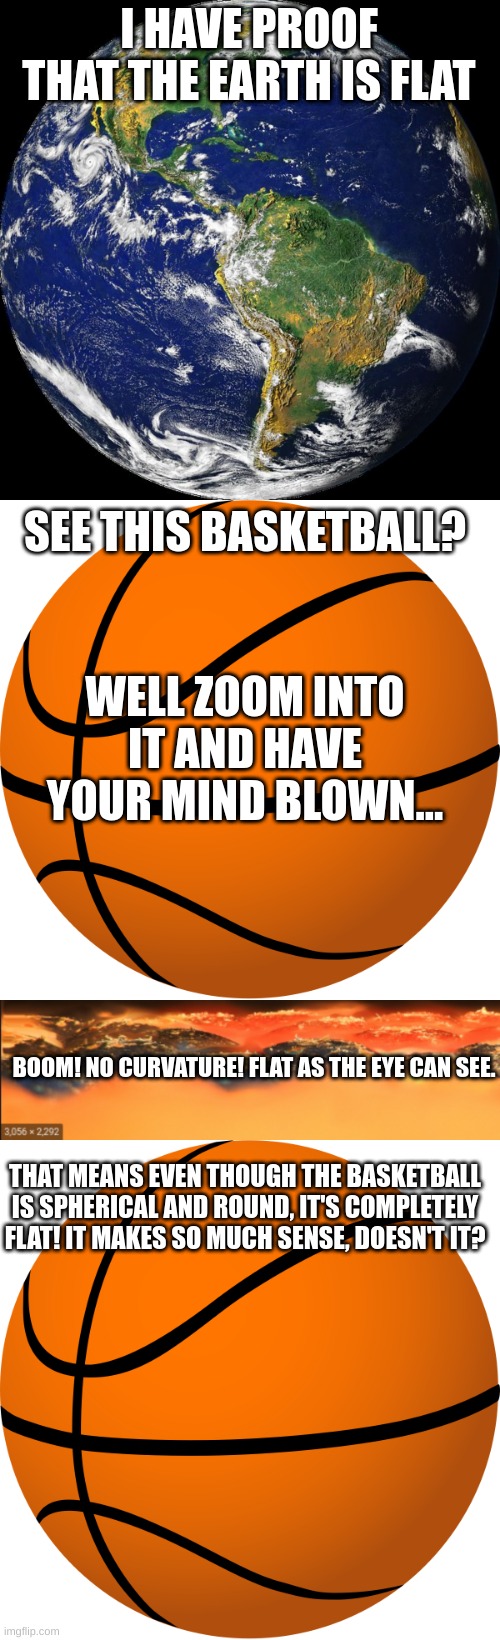 Flat earthers should read a science textbook. | I HAVE PROOF THAT THE EARTH IS FLAT; SEE THIS BASKETBALL? WELL ZOOM INTO IT AND HAVE YOUR MIND BLOWN... BOOM! NO CURVATURE! FLAT AS THE EYE CAN SEE. THAT MEANS EVEN THOUGH THE BASKETBALL IS SPHERICAL AND ROUND, IT'S COMPLETELY FLAT! IT MAKES SO MUCH SENSE, DOESN'T IT? | image tagged in globe,basketball,flat earth,satire,stupid people | made w/ Imgflip meme maker